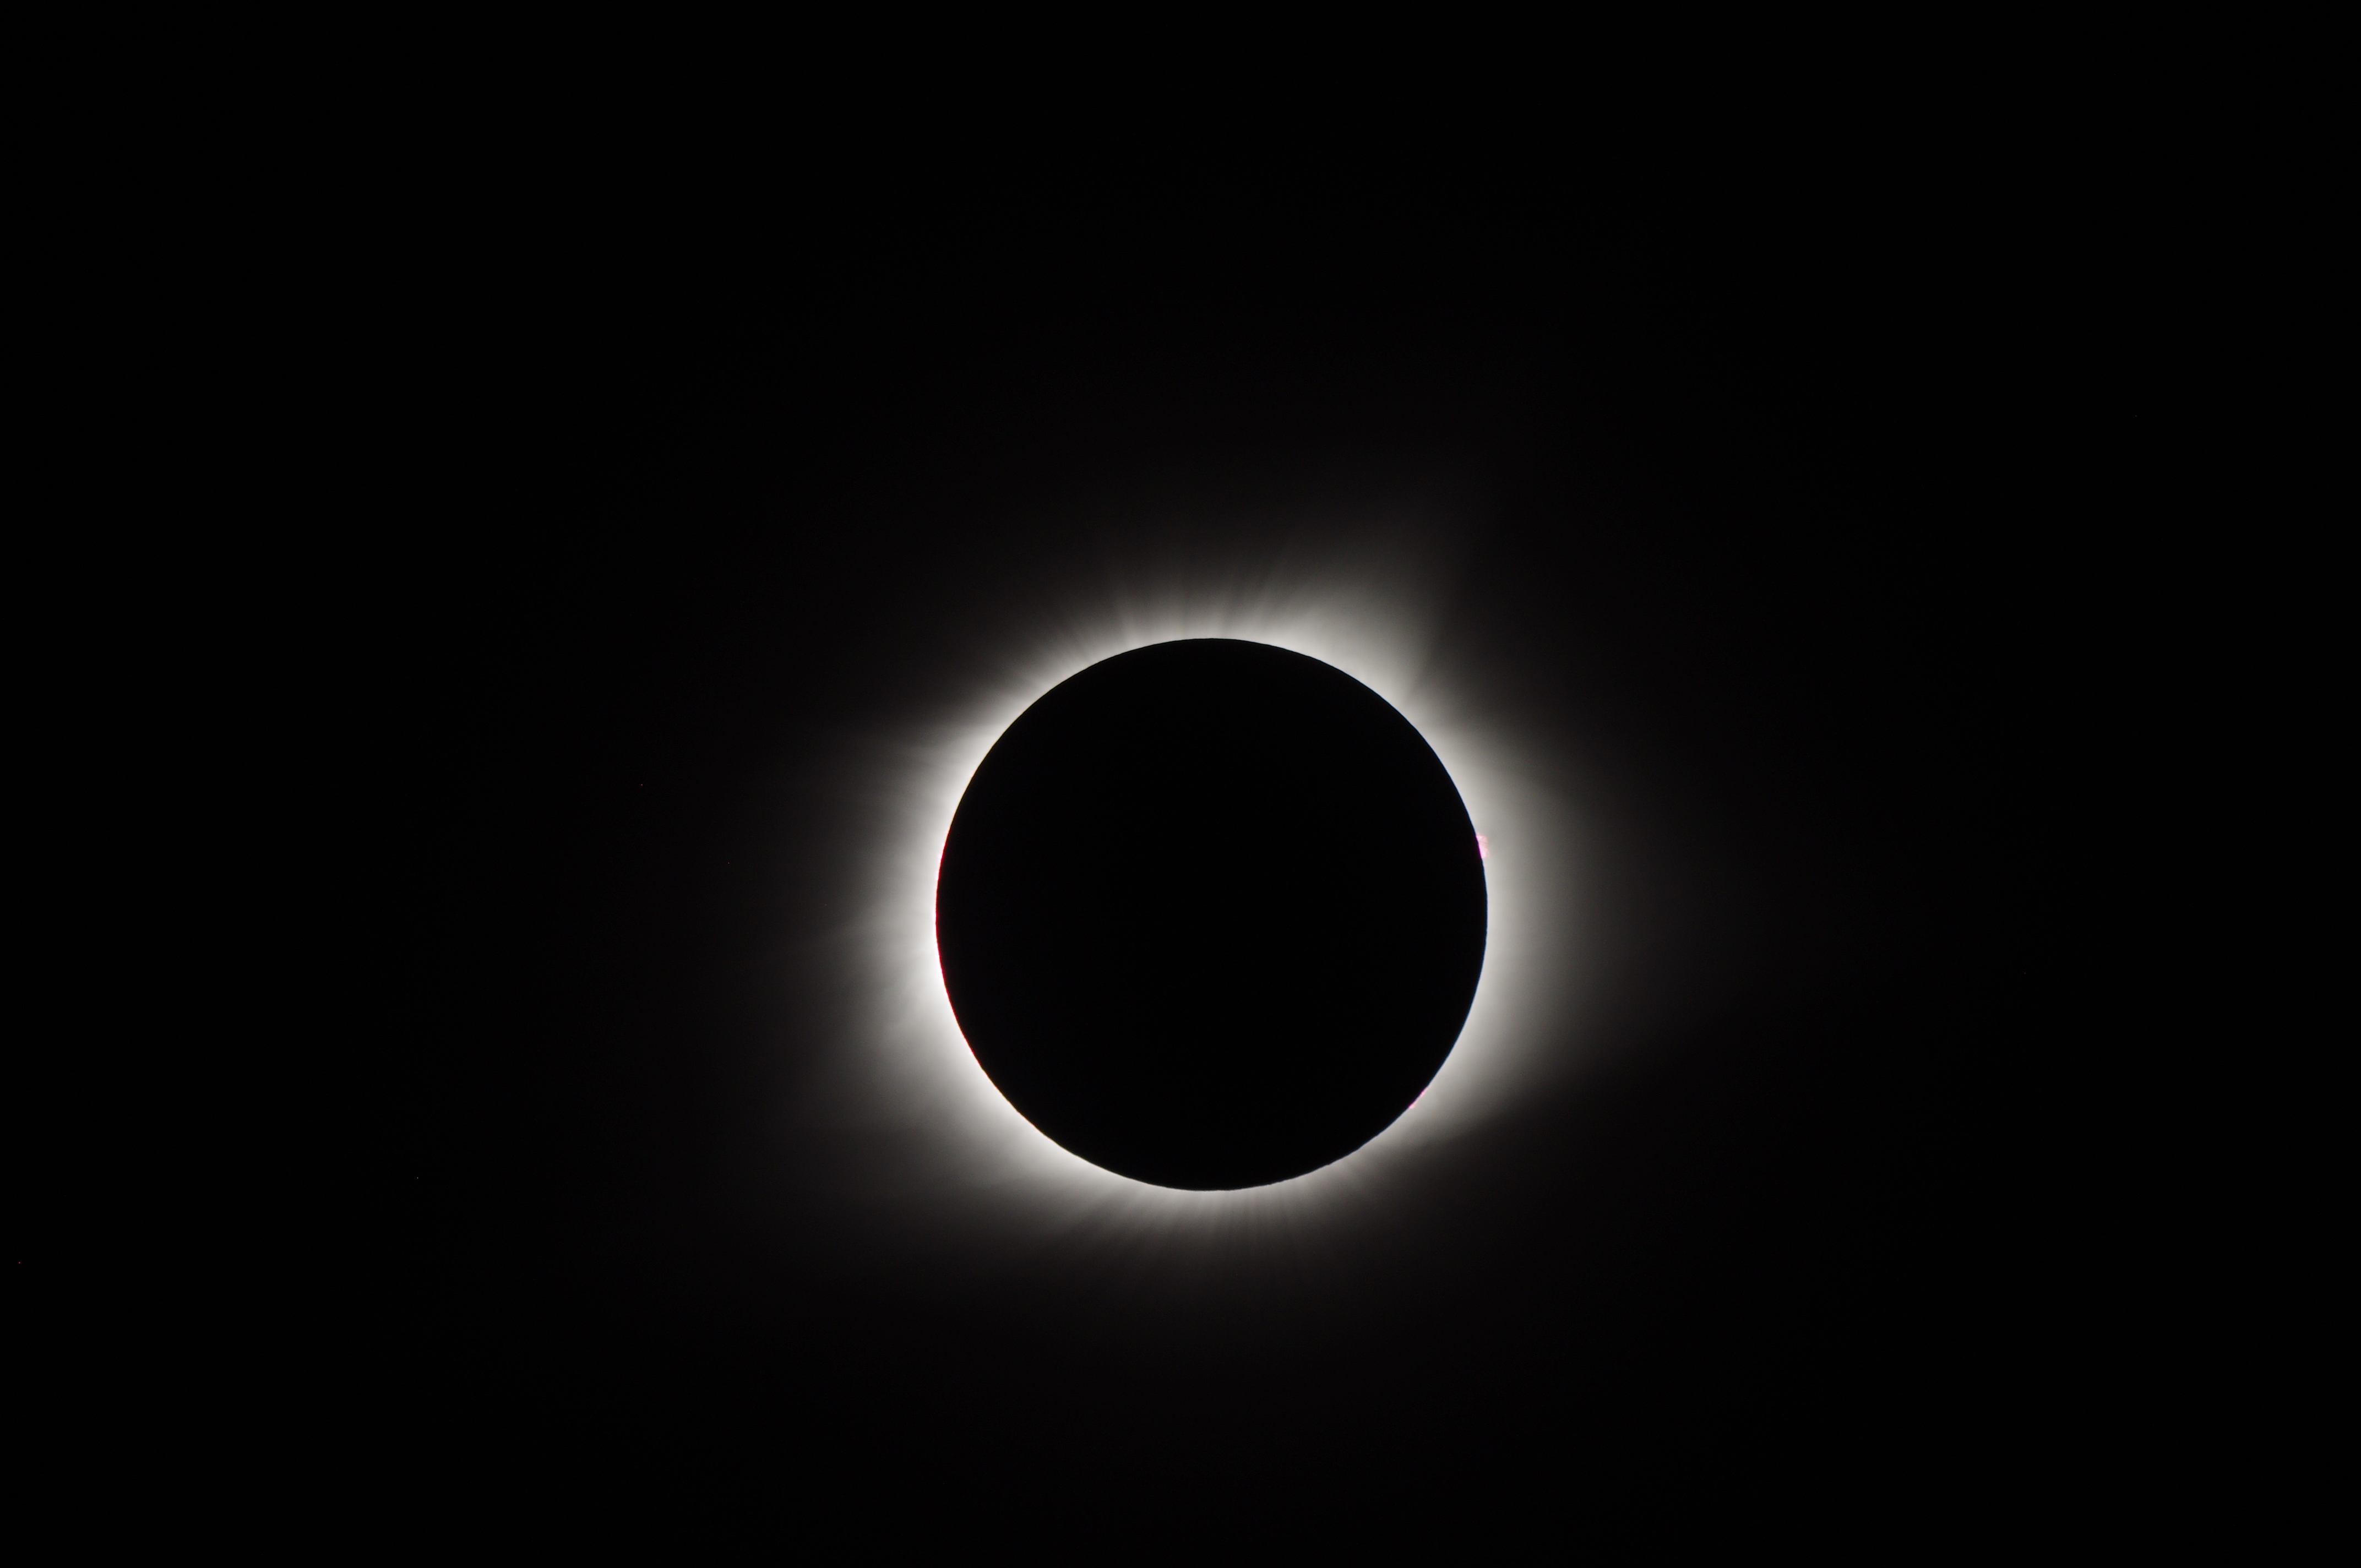 The totally eclipsed sun on August 21 shows red prominences on the right side of the sun